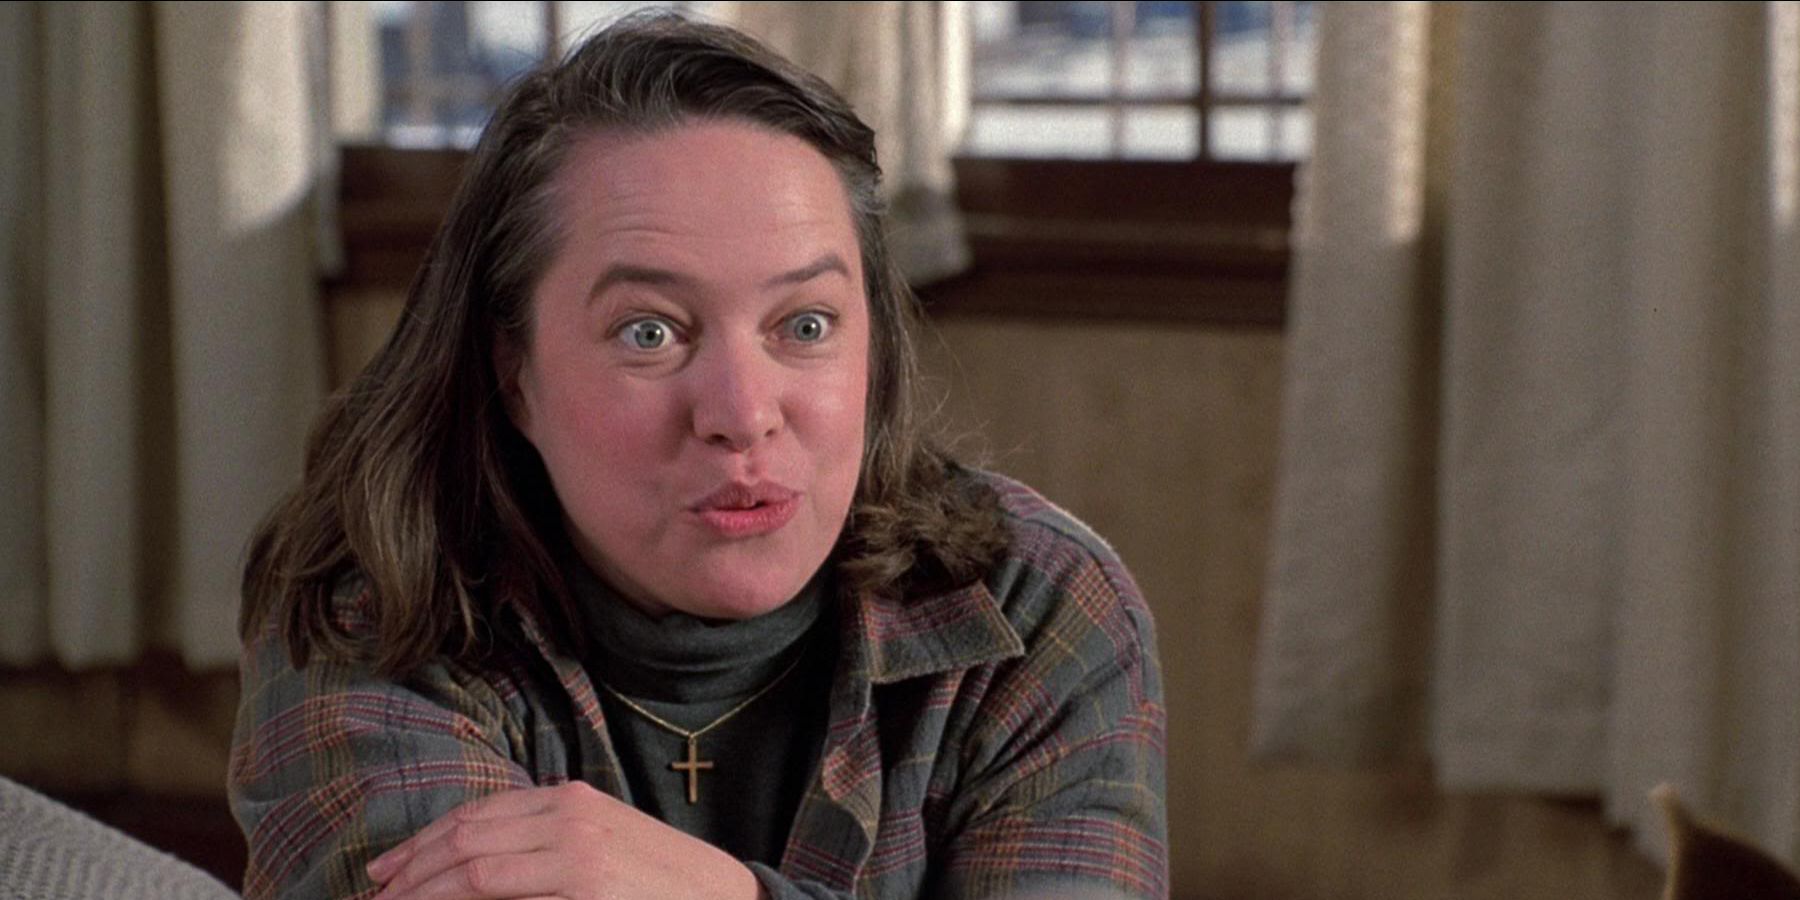 Kathy Bates vs. Lizzy Caplan: Who Was The Better Annie Wilkes (& Why)